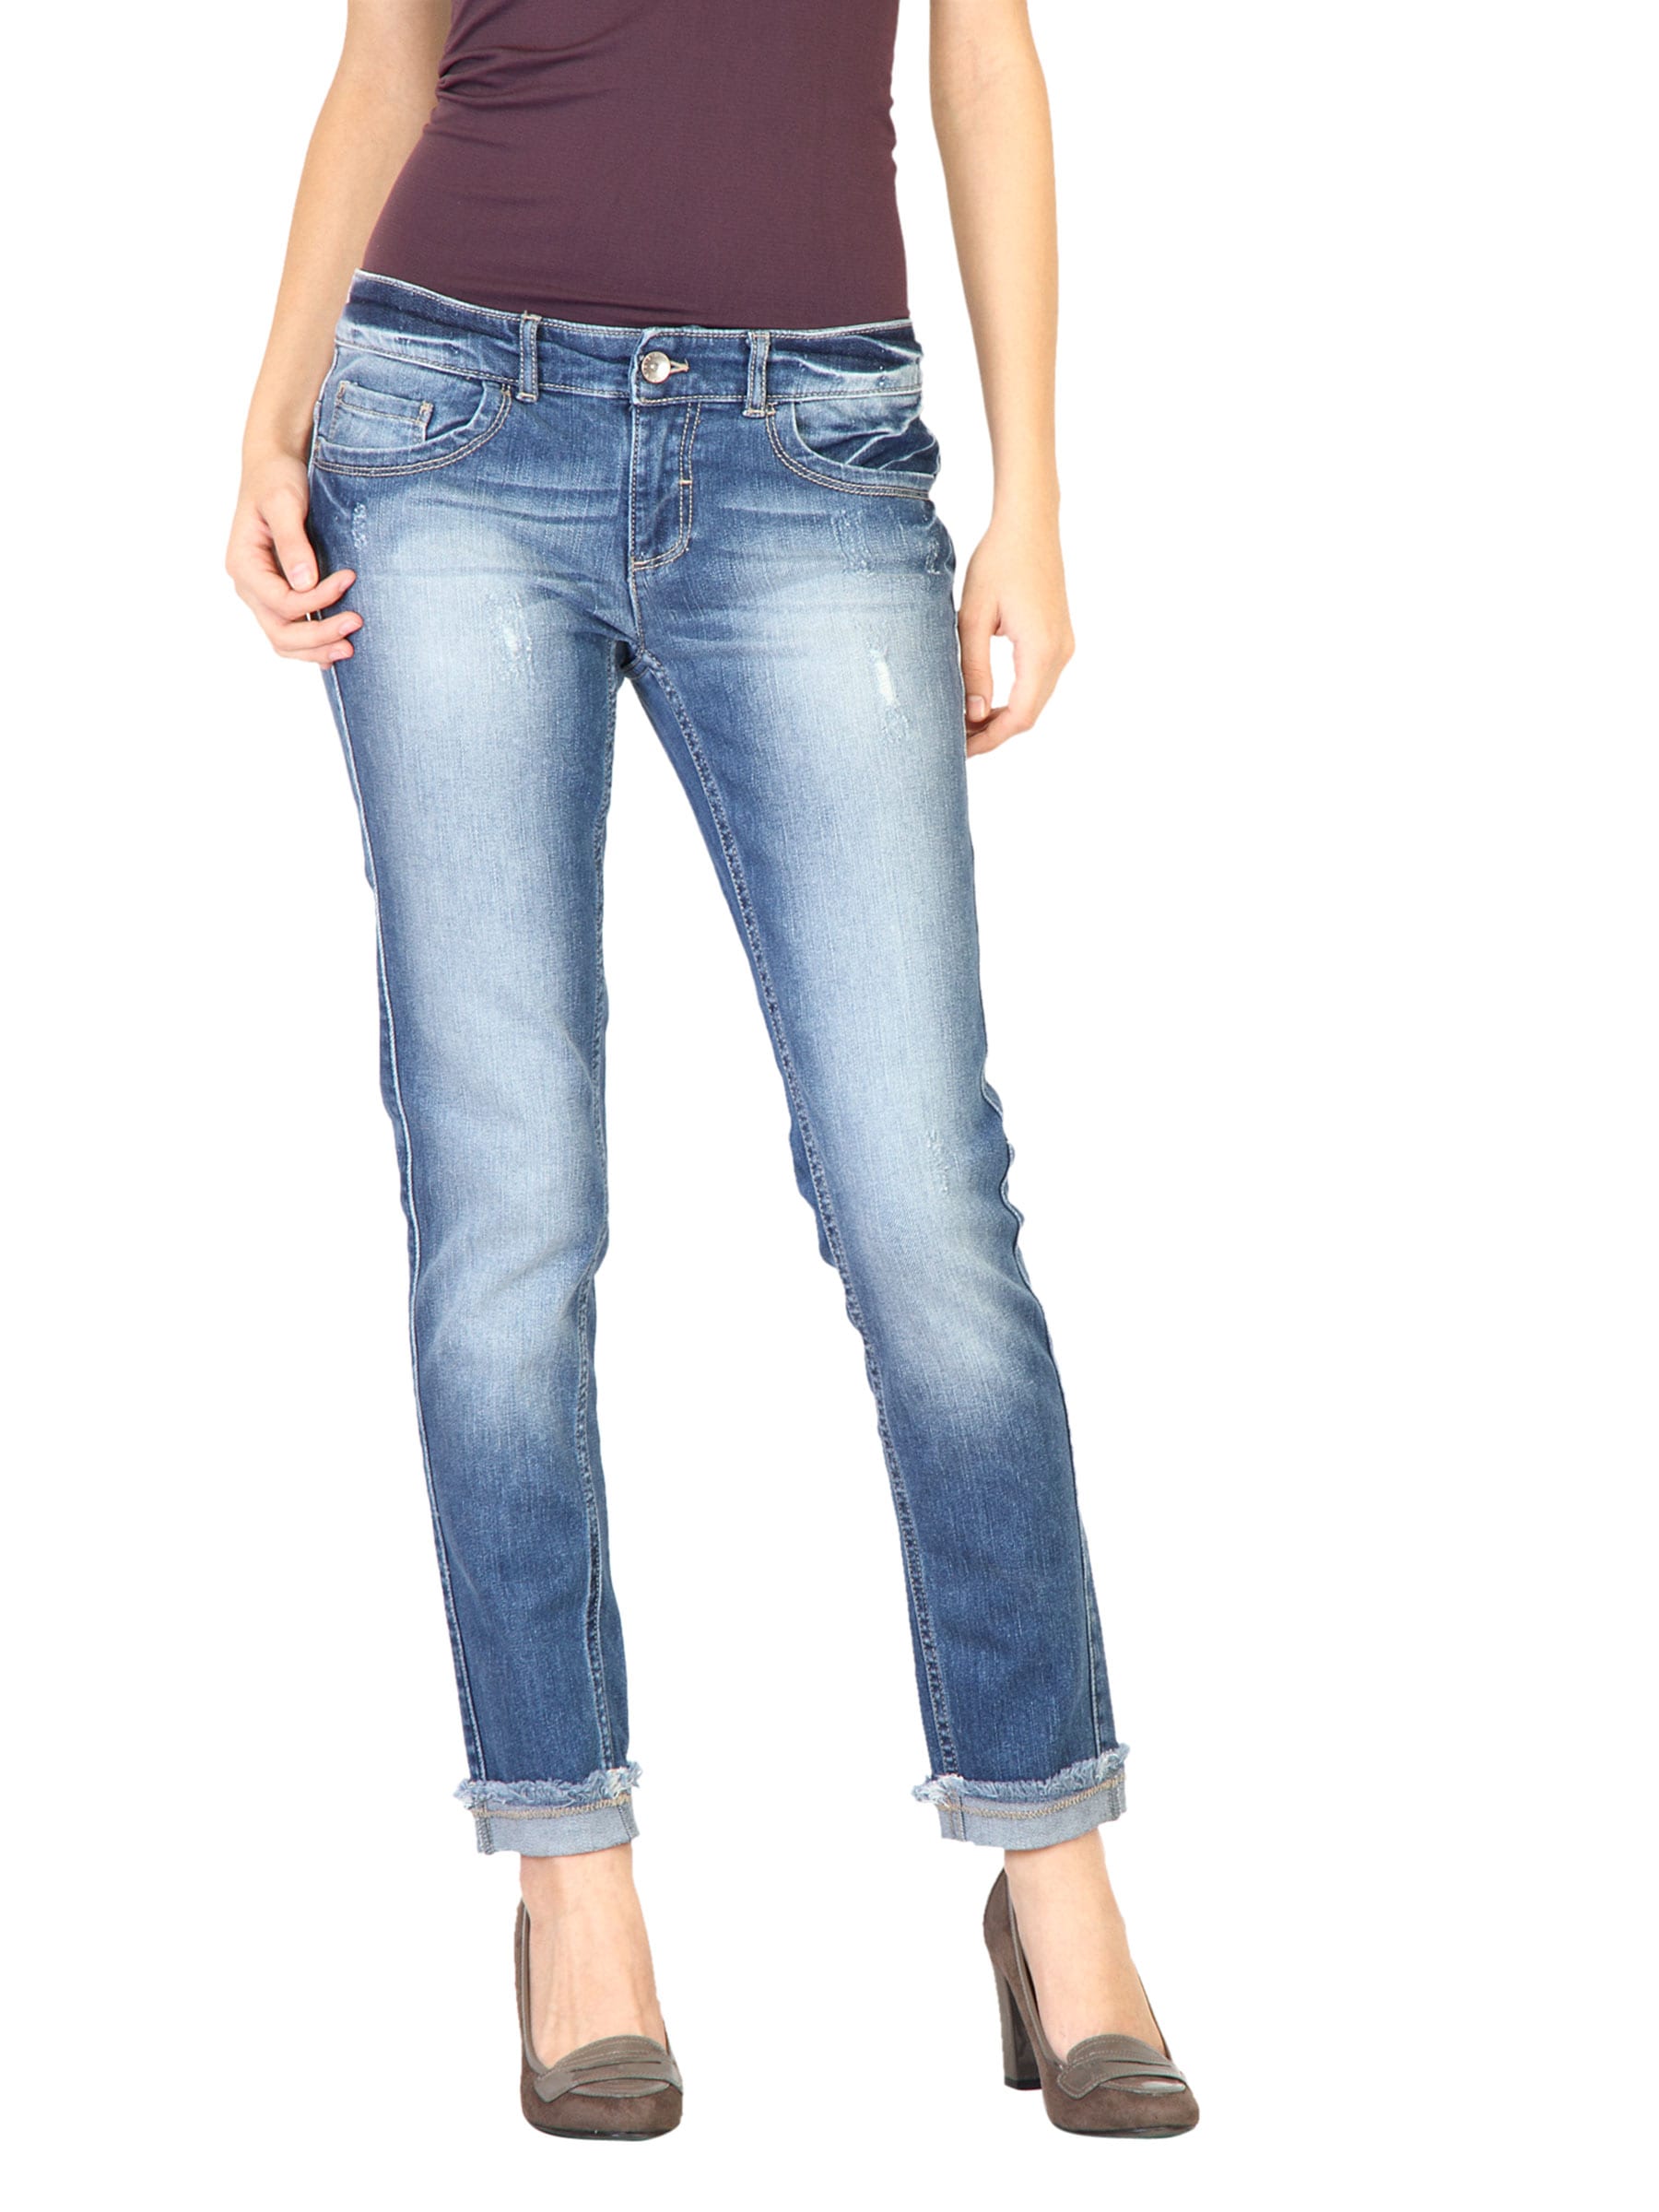 United Colors of Benetton Women Washed Blue Jeans